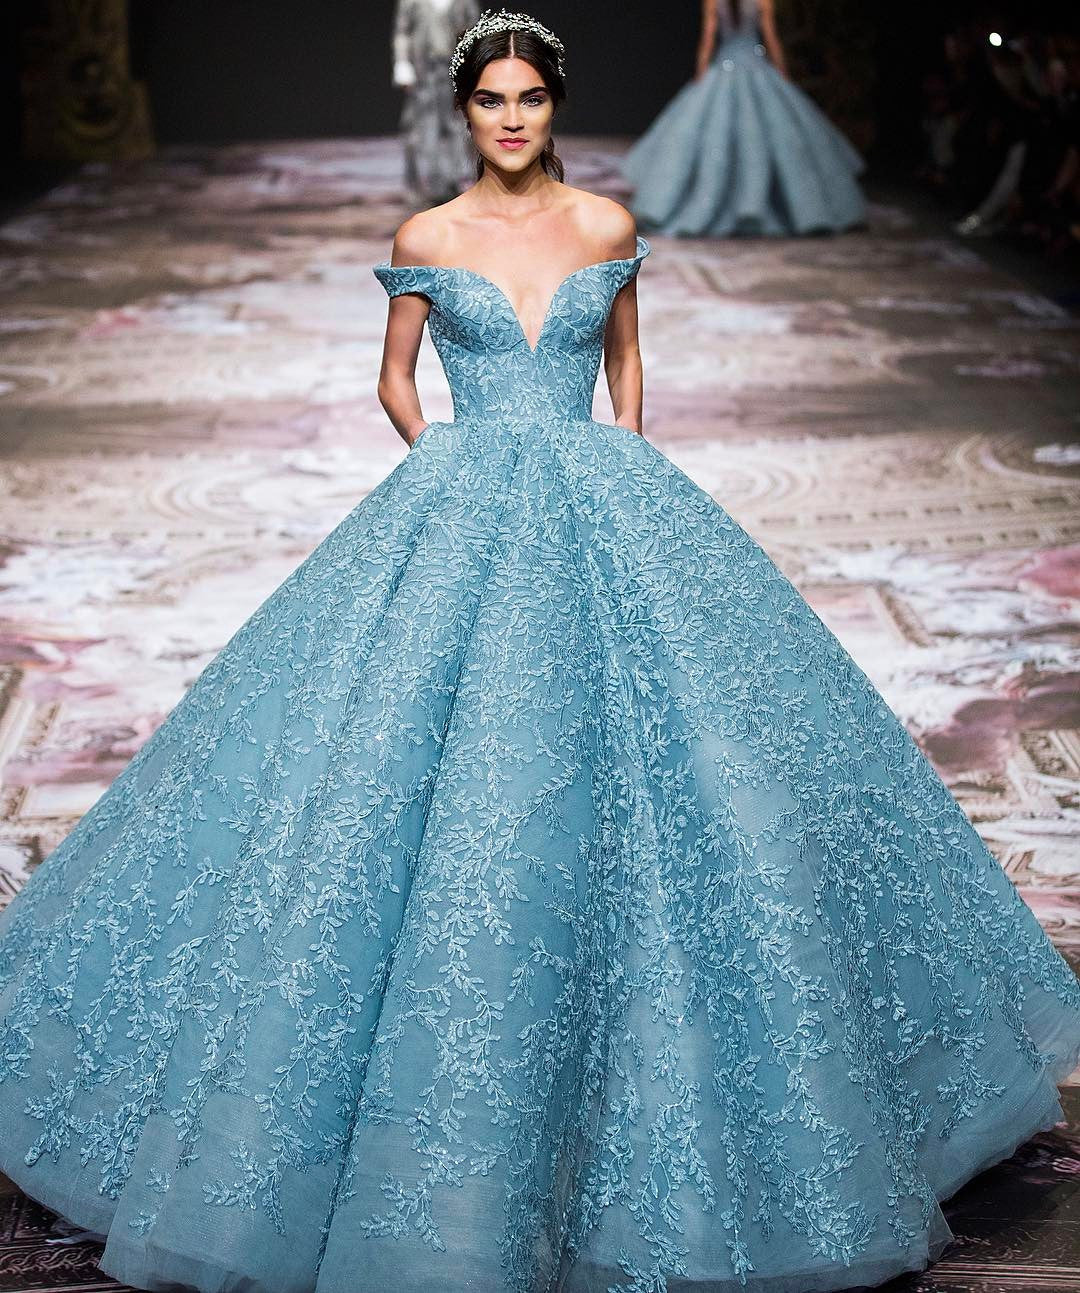 Aishwarya Rai Bachchan looked ethereal in a powder-blue brocade ball gown by Michael Cinco